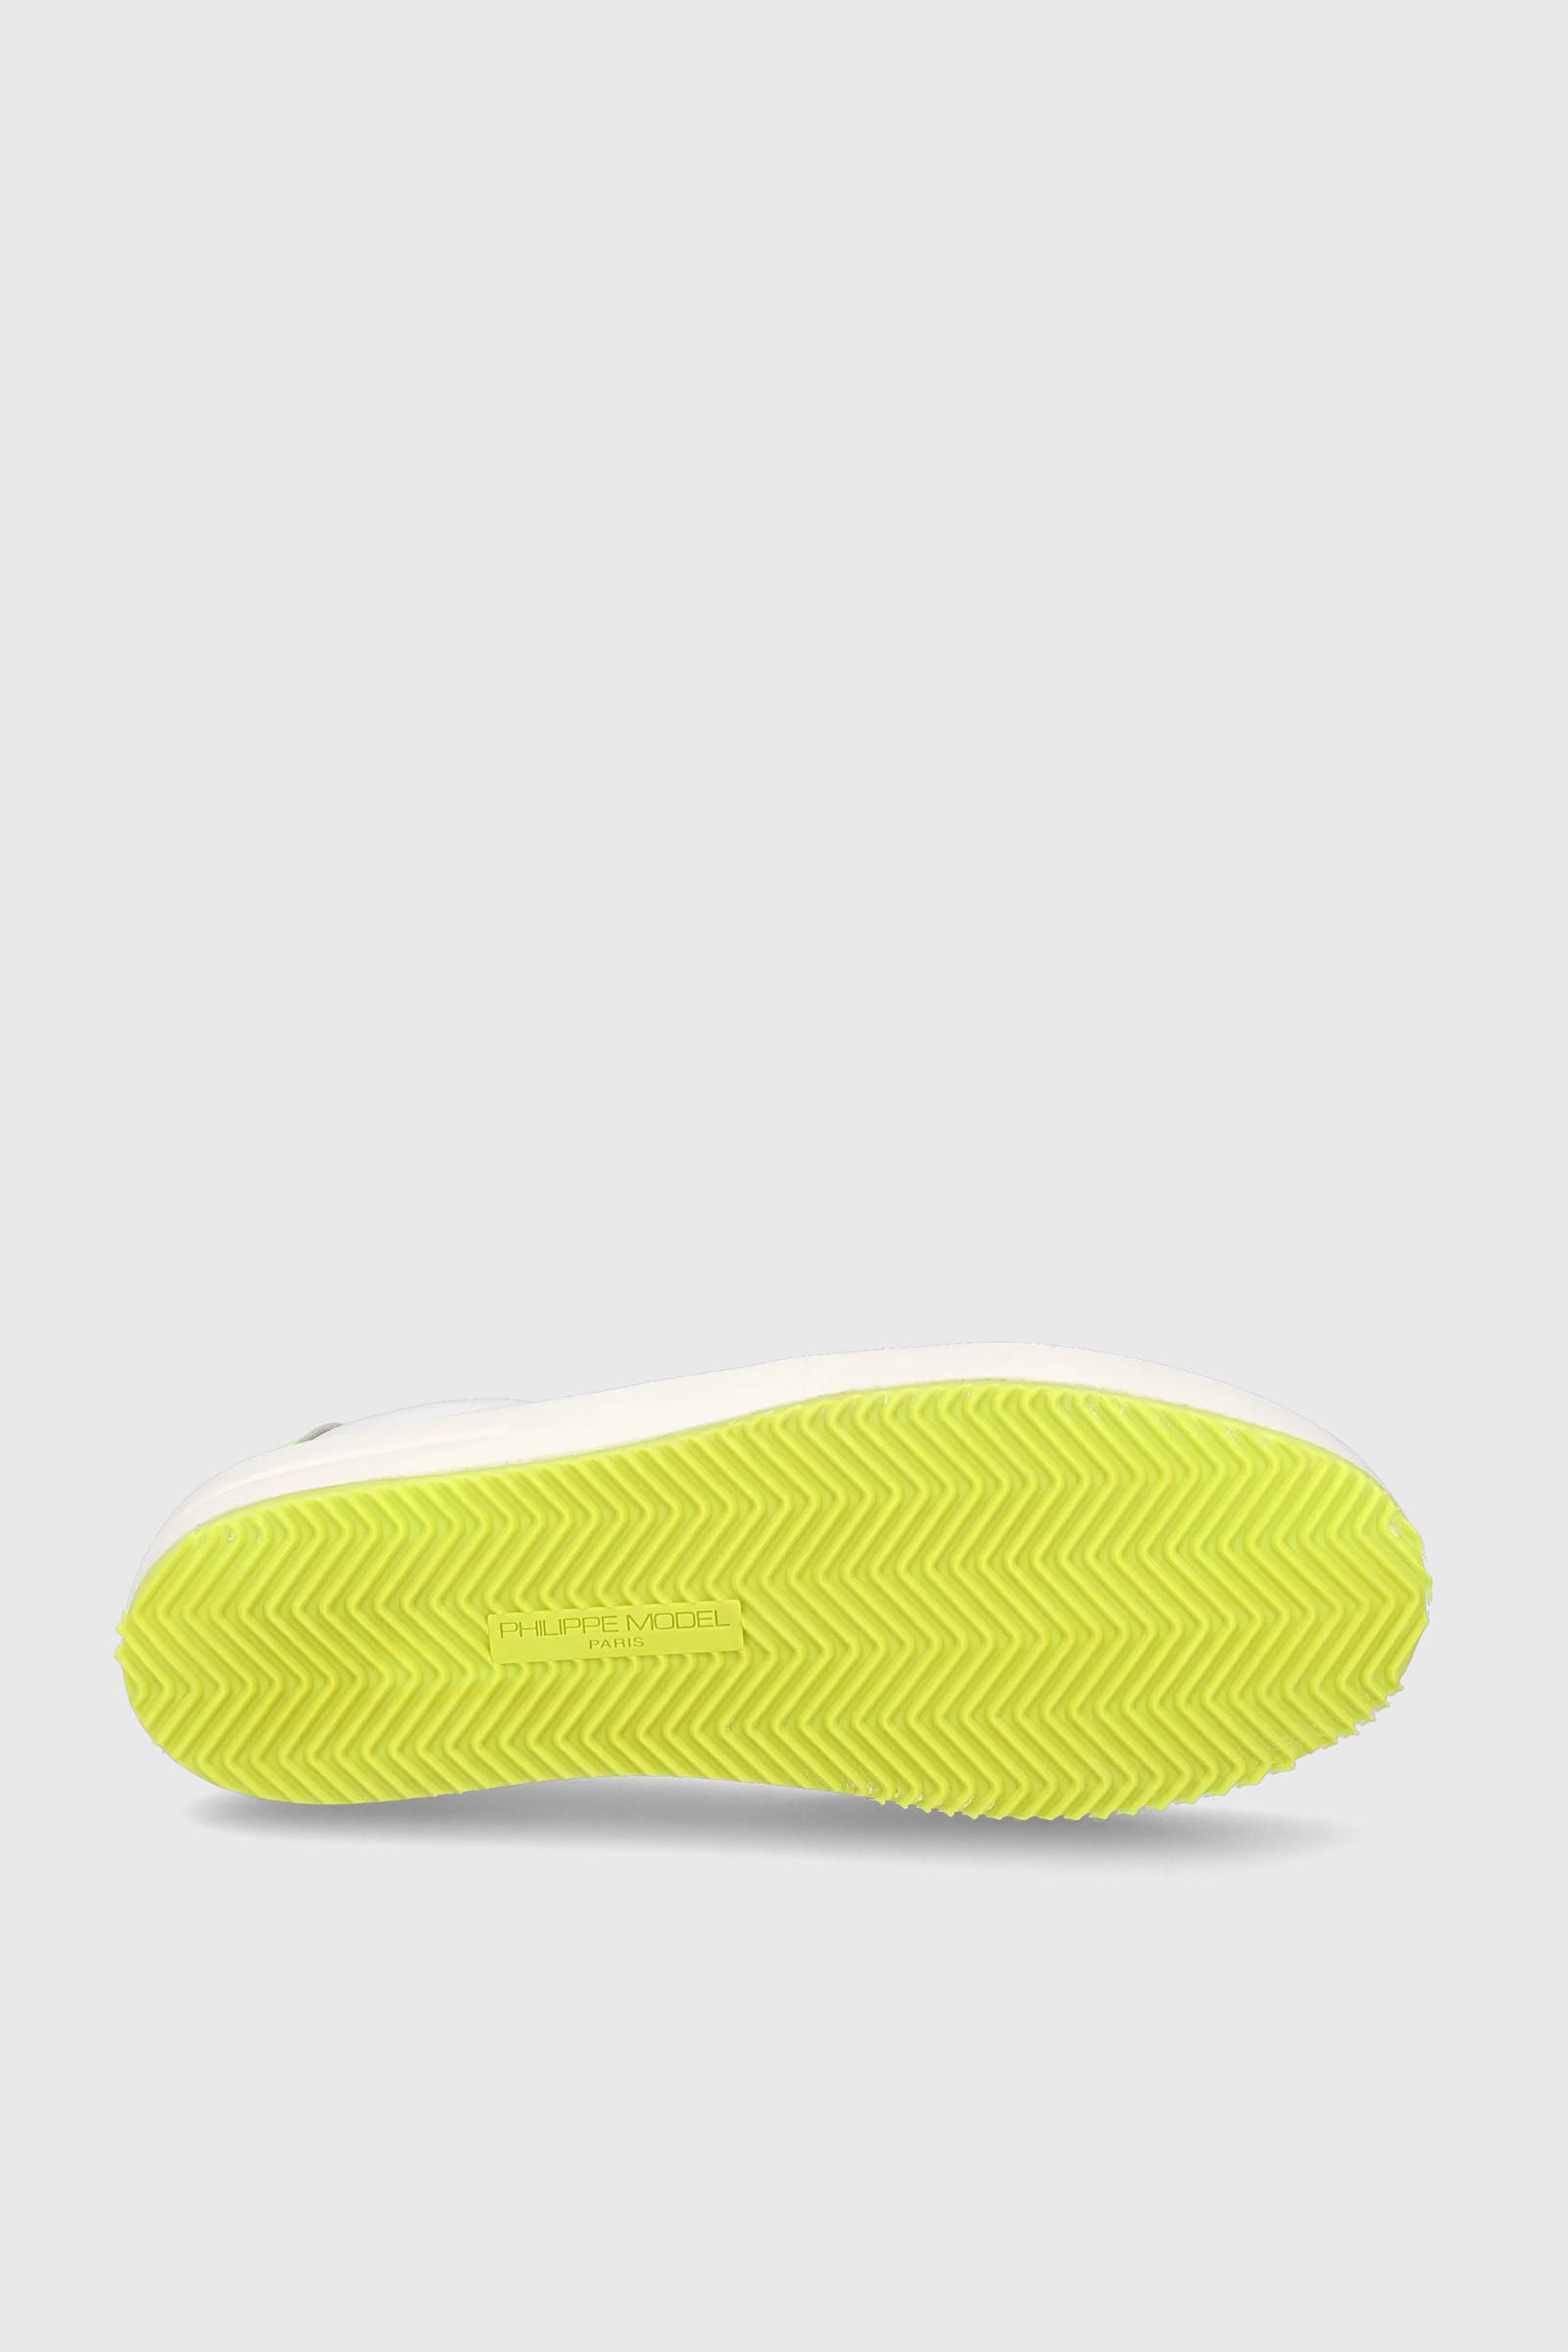 Philippe Model Sneaker Nice Veau Leather White/Yellow Fluo - 5